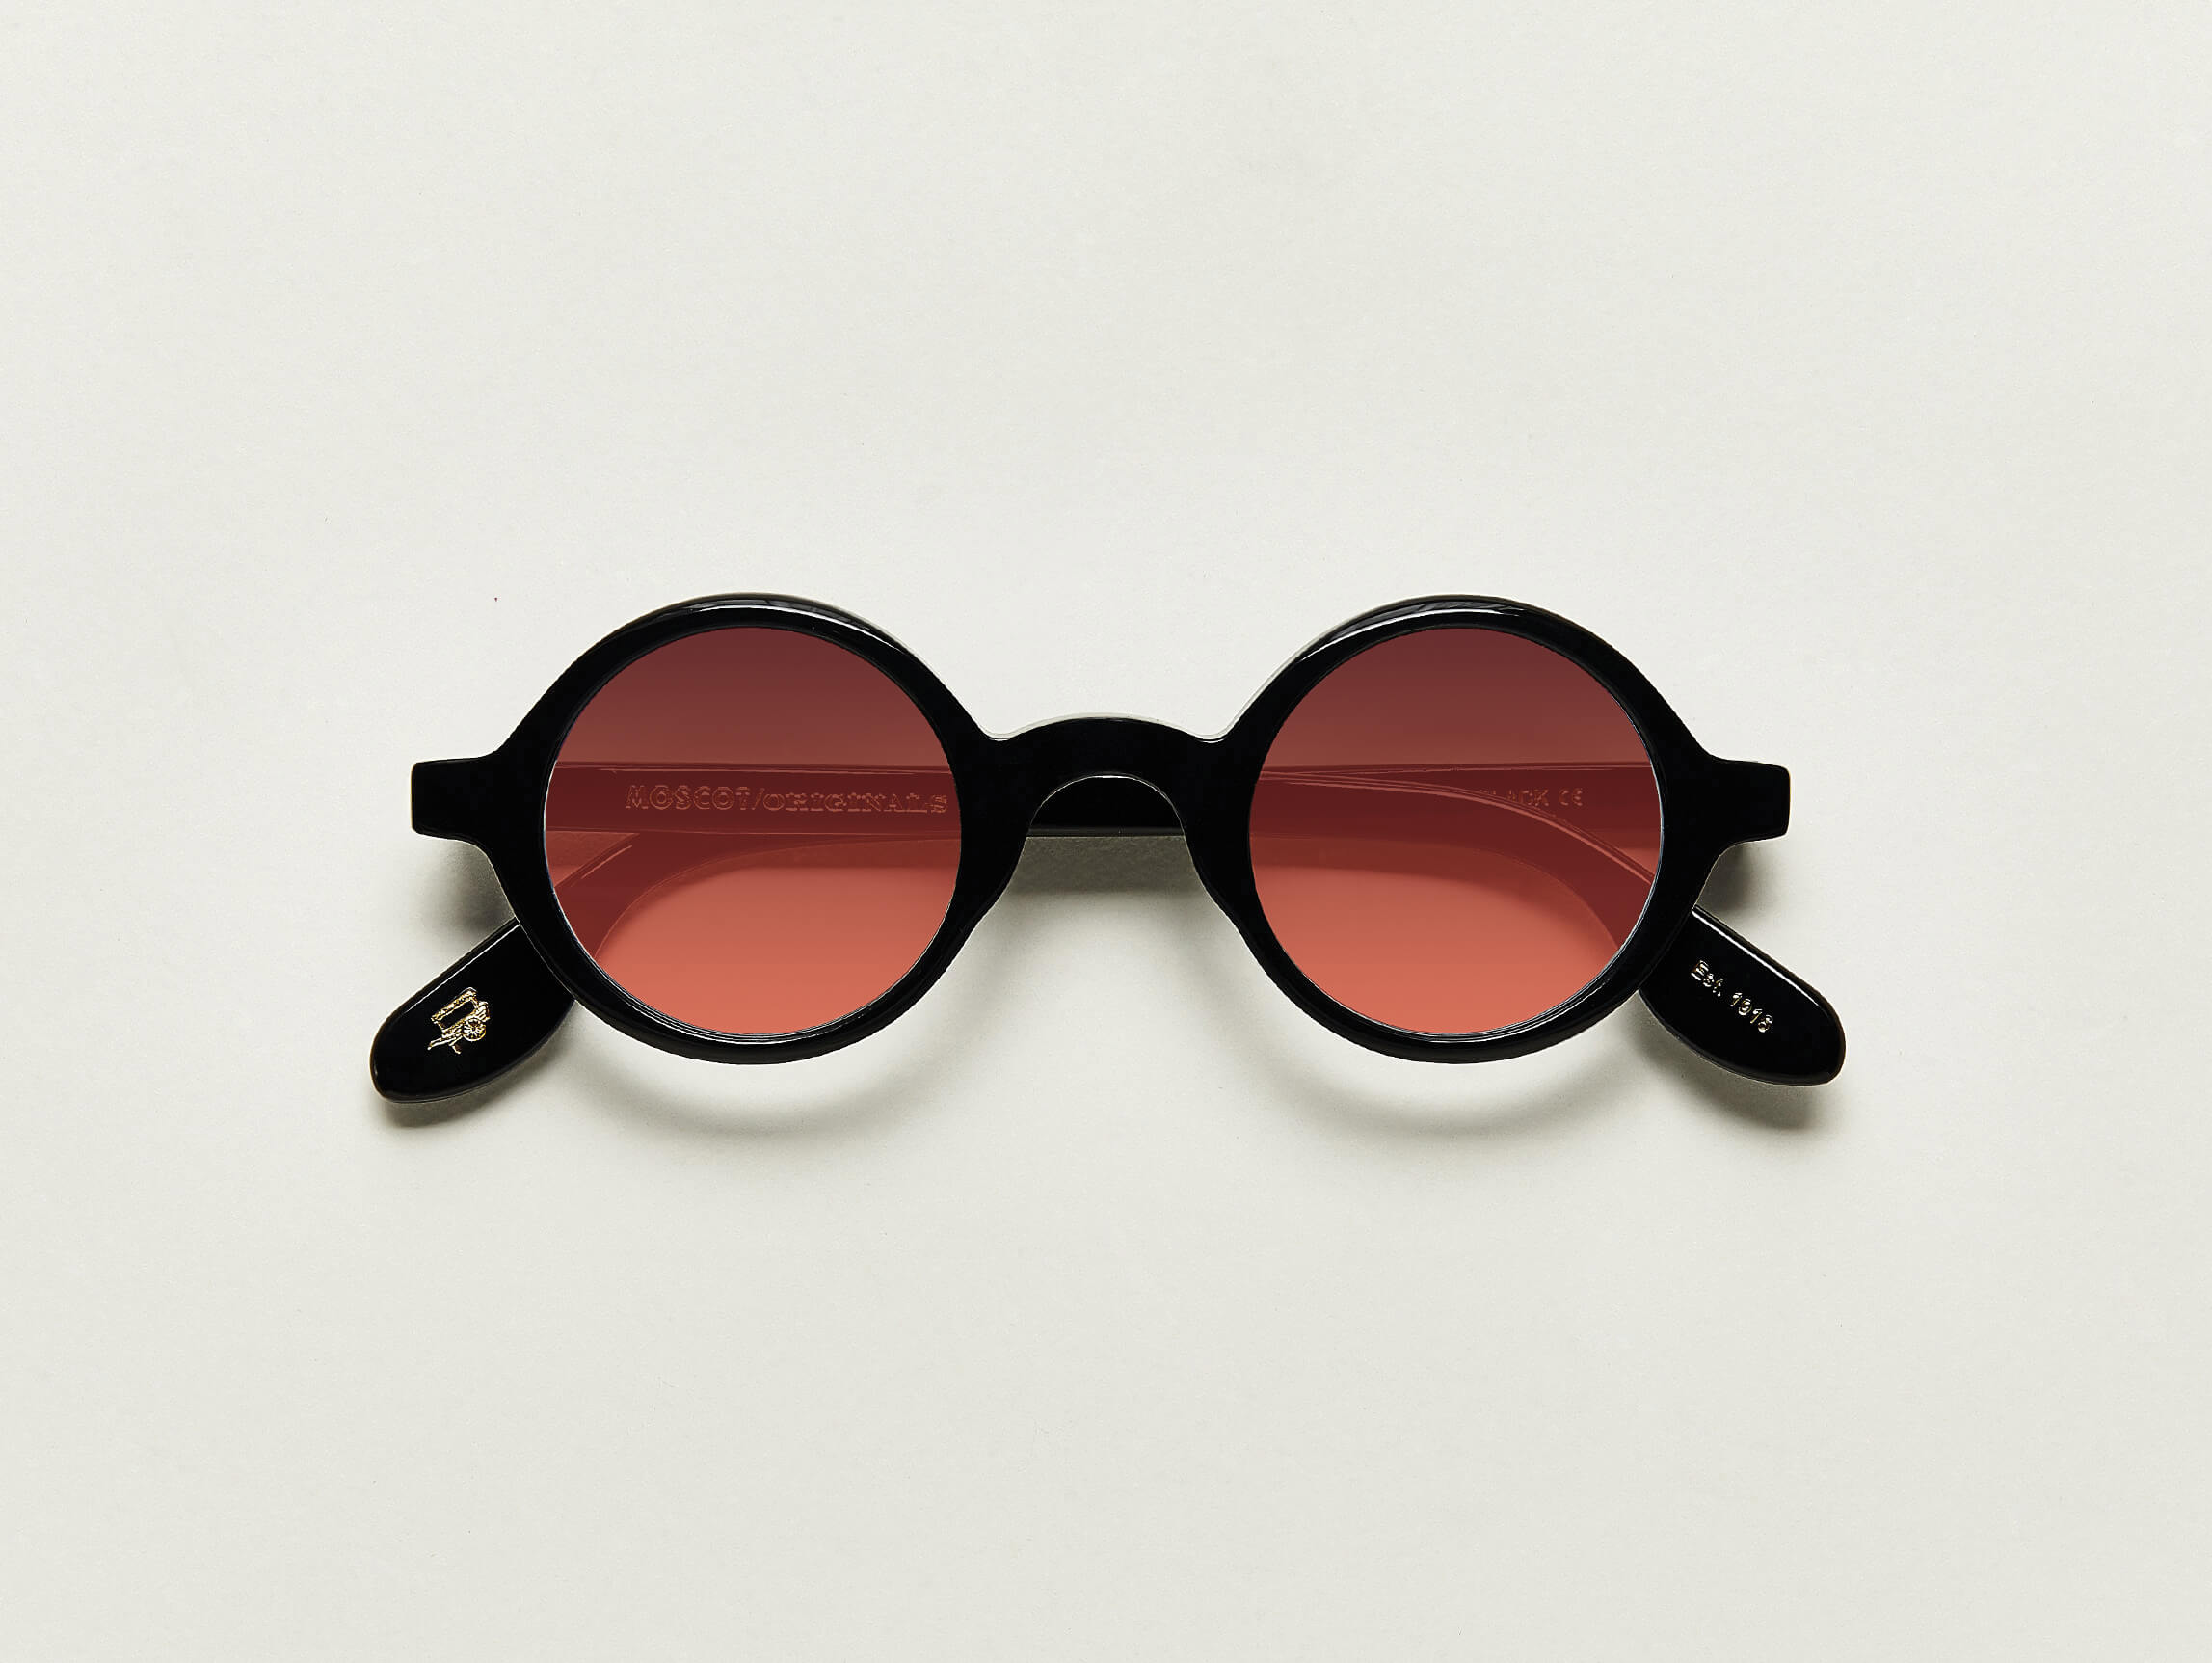 #color_cabernet | The ZOLMAN in Black with Cabernet Tinted Lenses